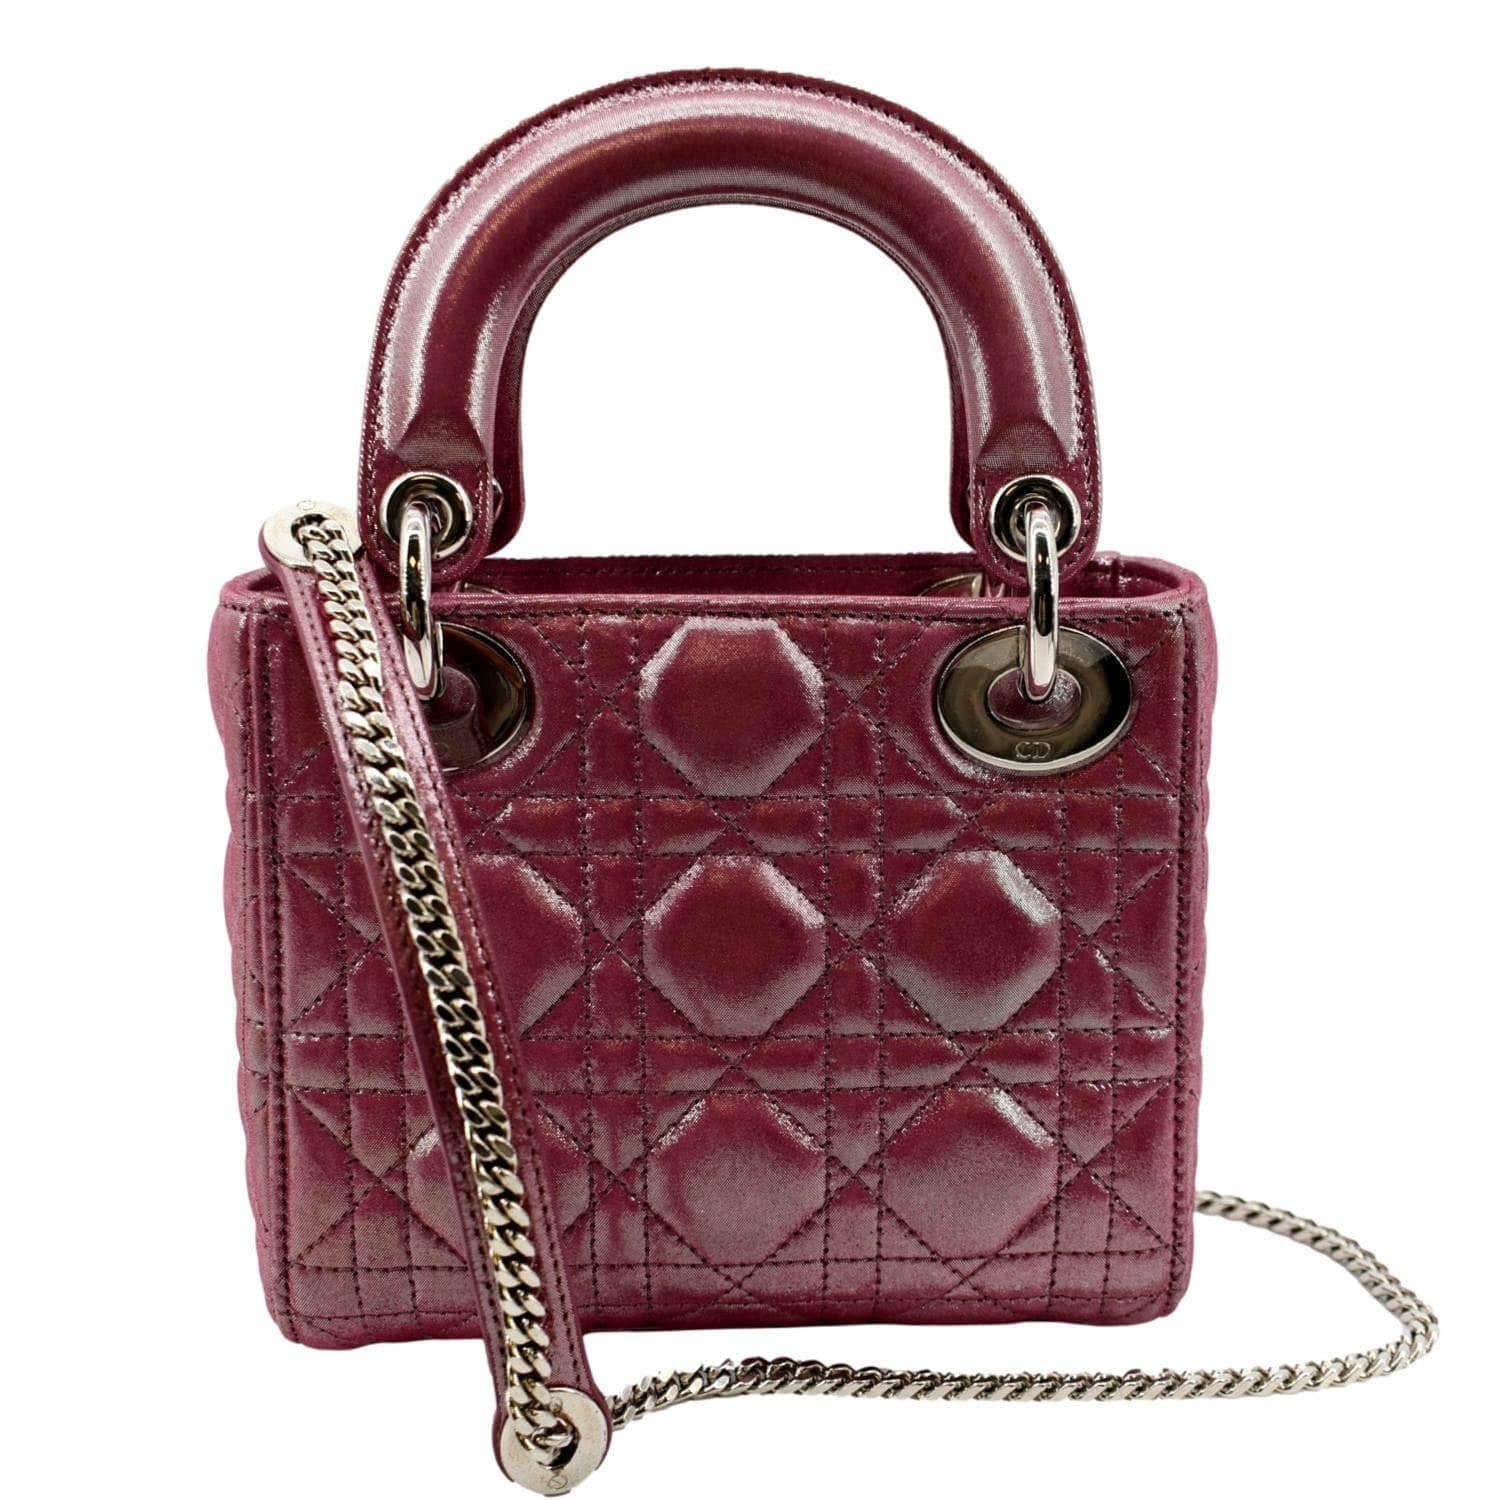 HOW TO STYLE THE RED LADY DIOR HANDBAG